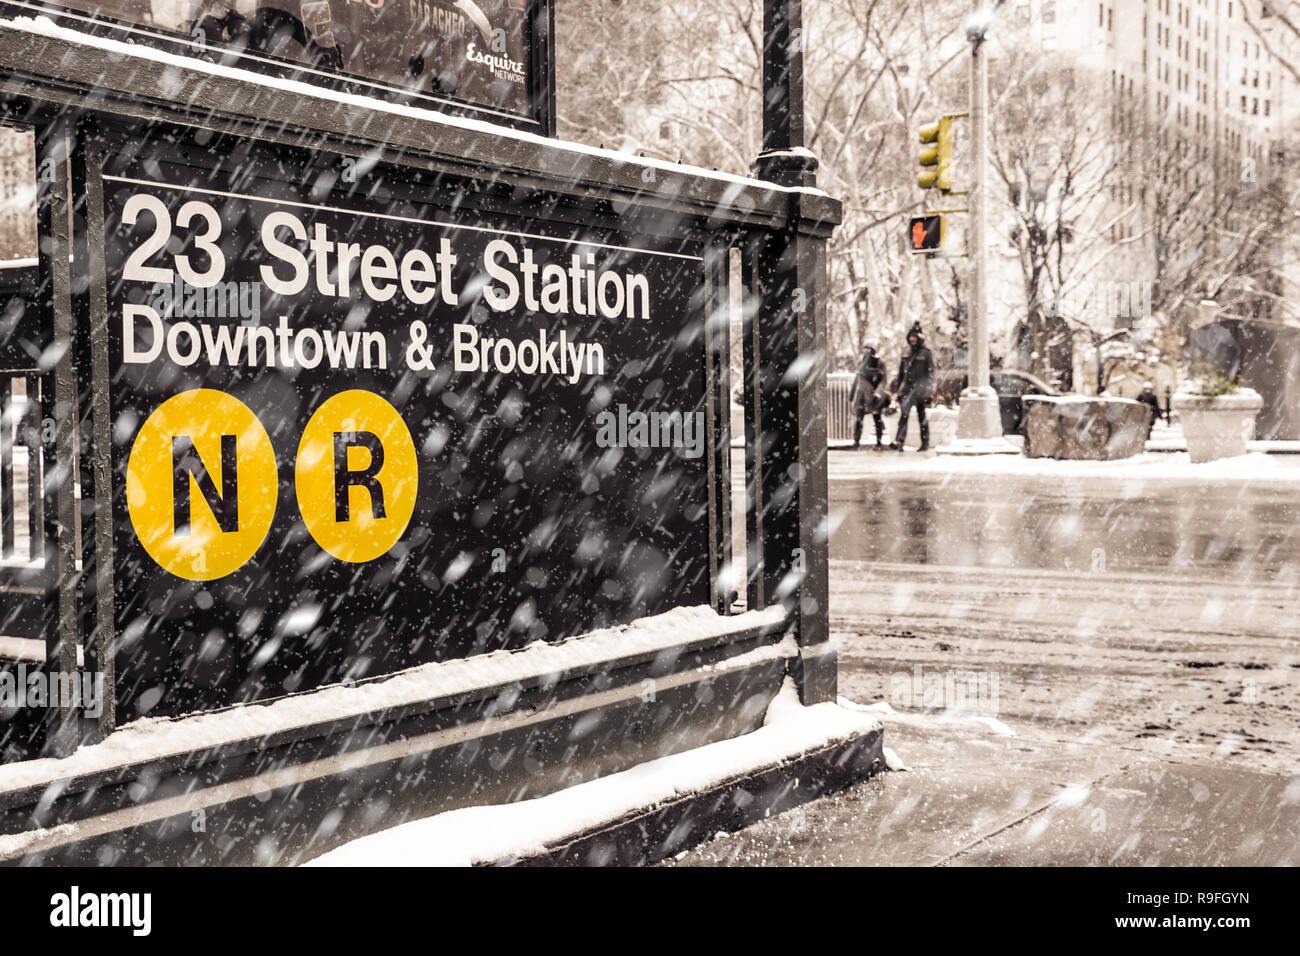 Midtown New York City Manhattan street scene at the 23rd subway street station with snowflakes falling during winter snow storm Stock Photo